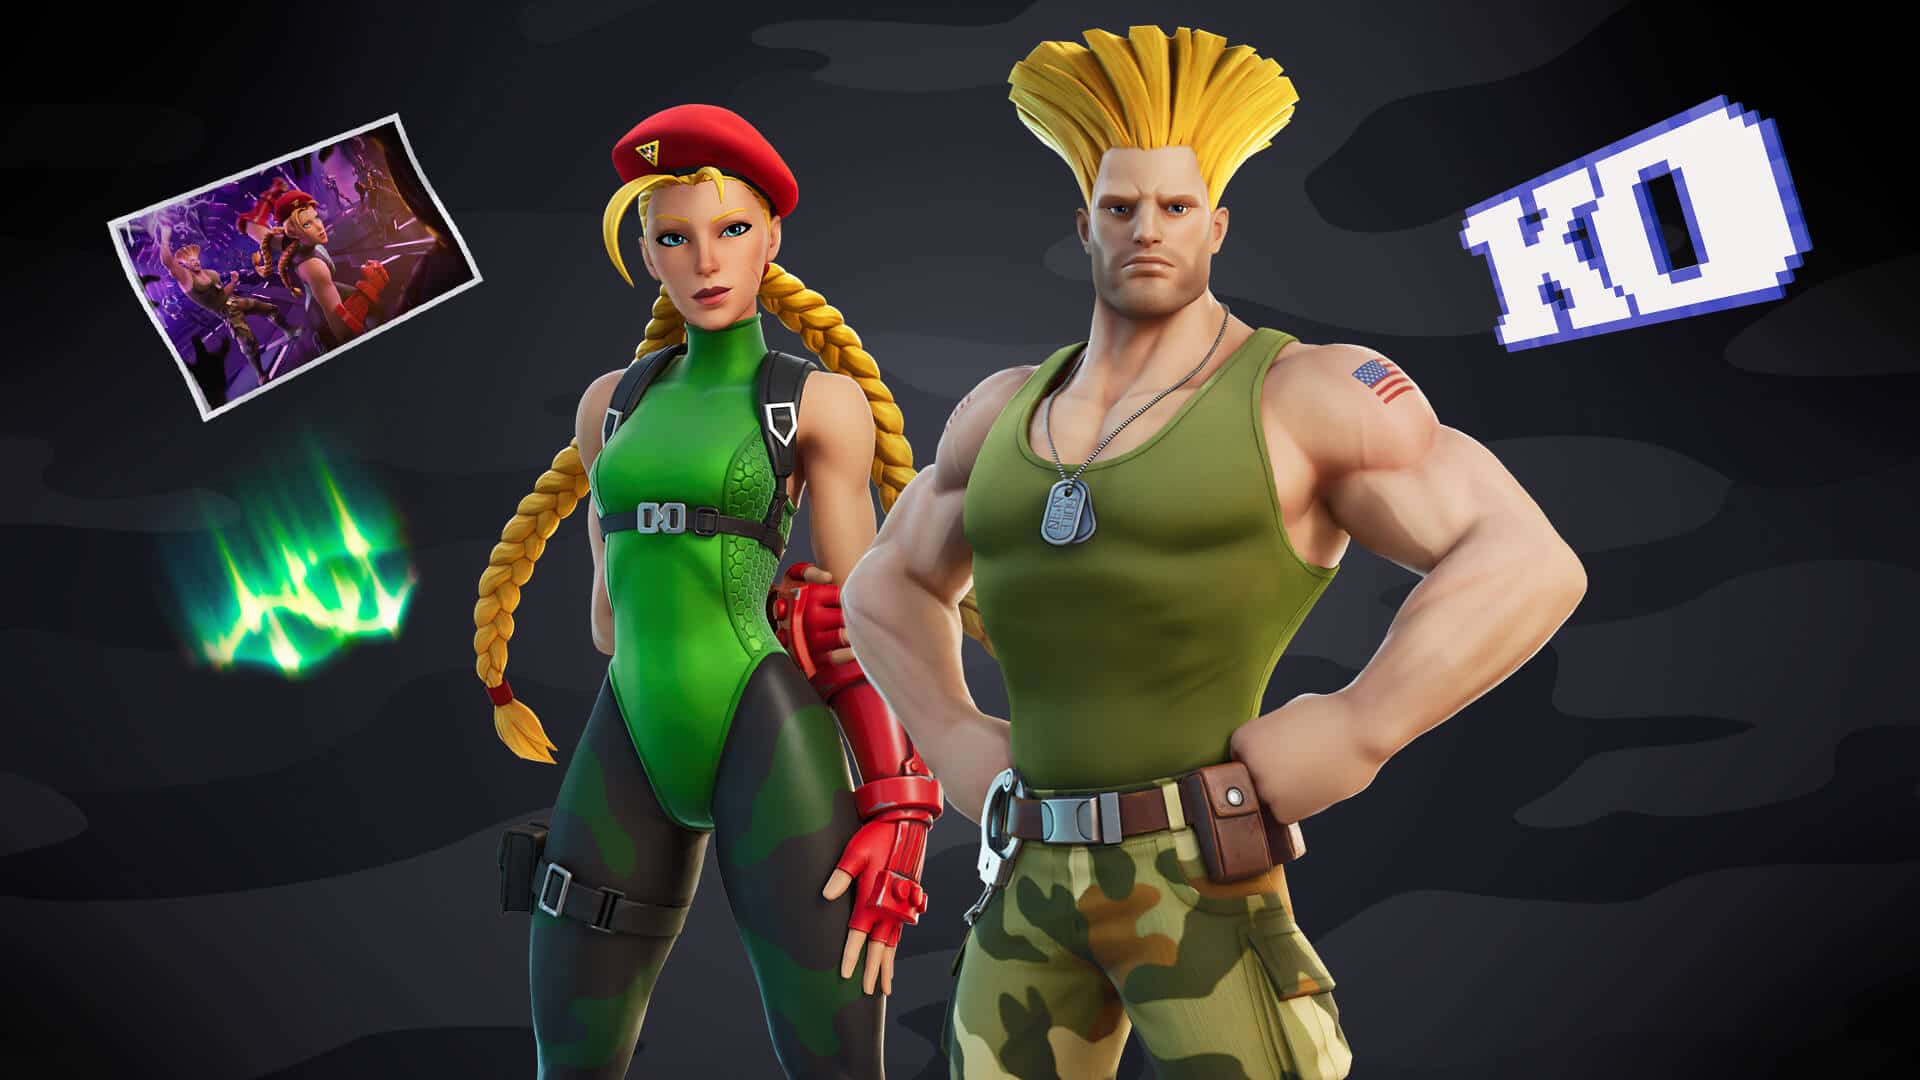 Fortnite – Cammy and Guile from Street Fighter coming August 7th